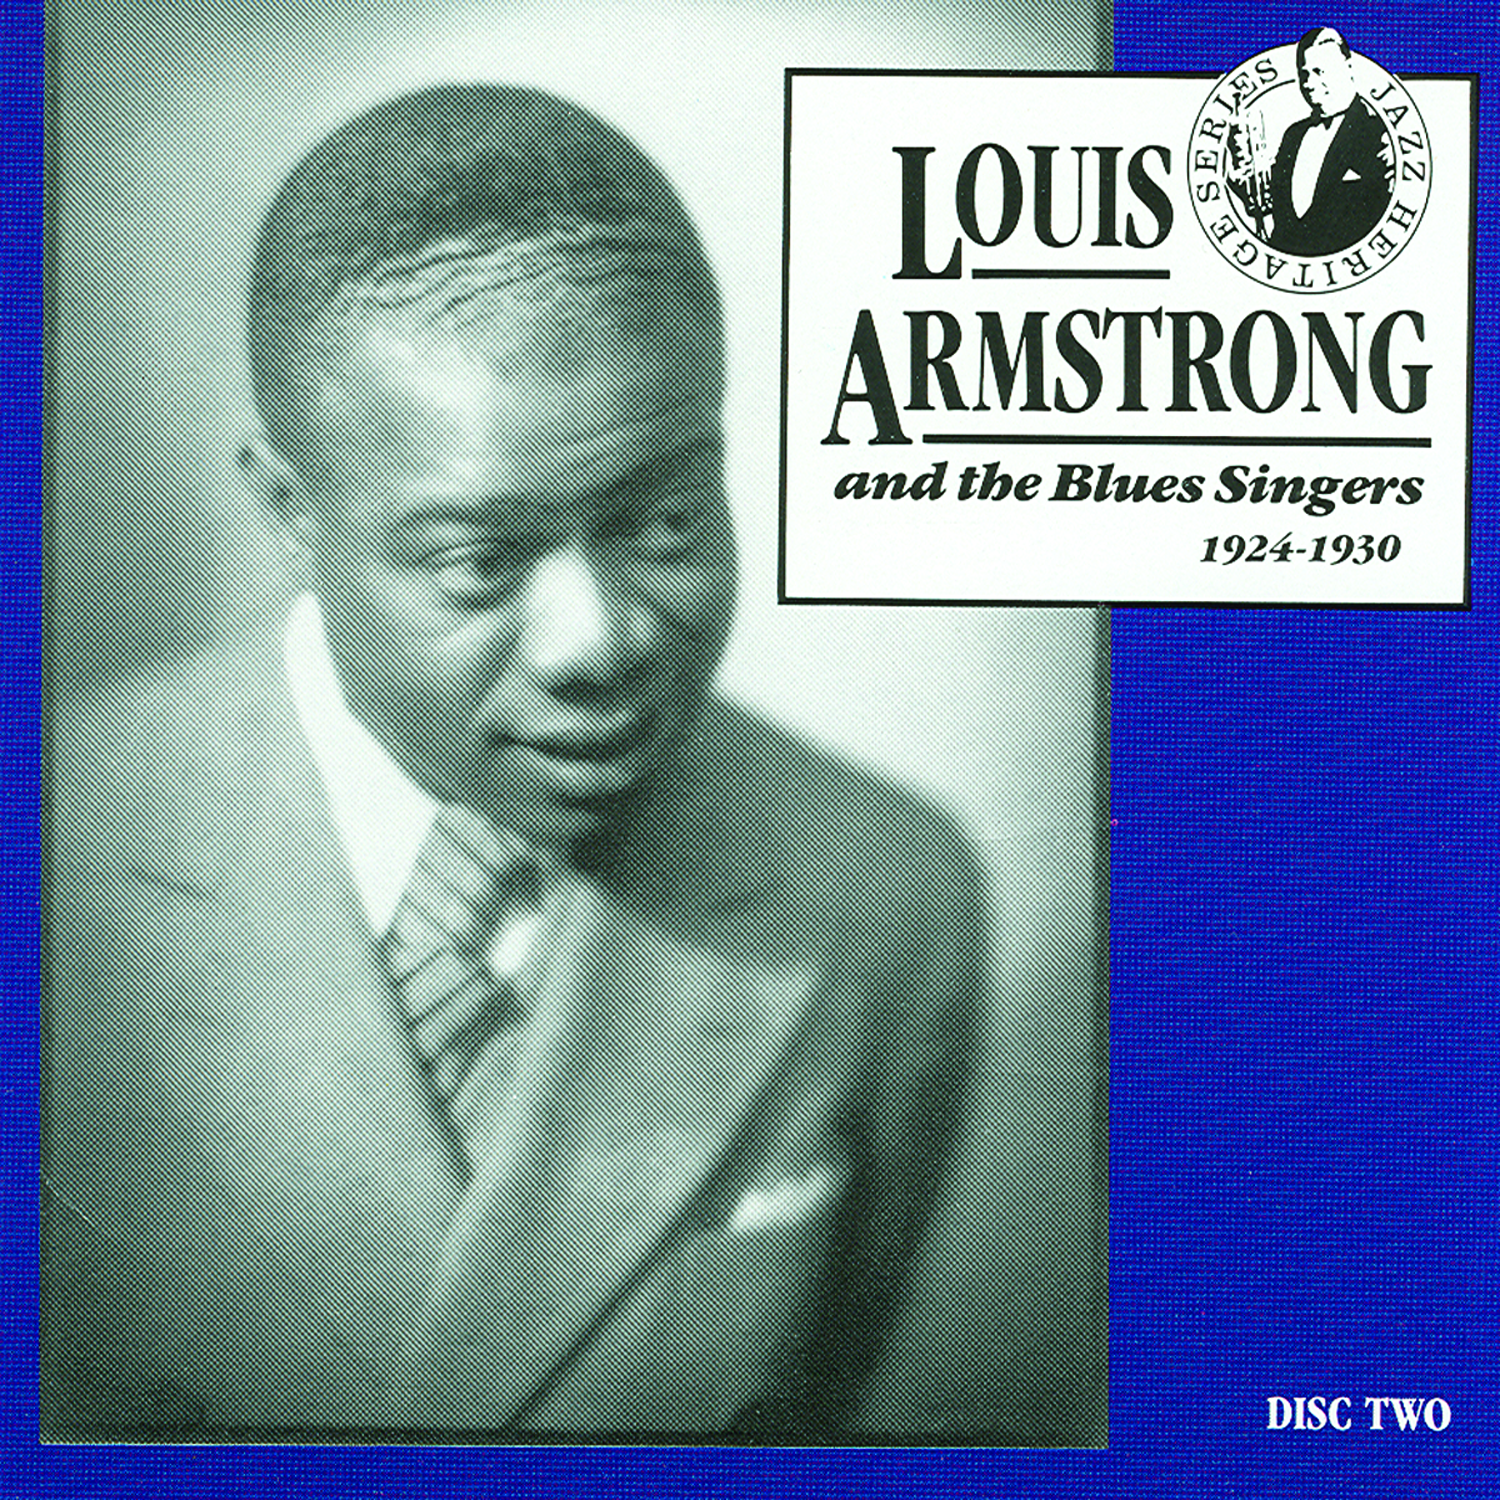 Louis Armstrong And The Blues Singers, 1924 - 1930, Vol.2